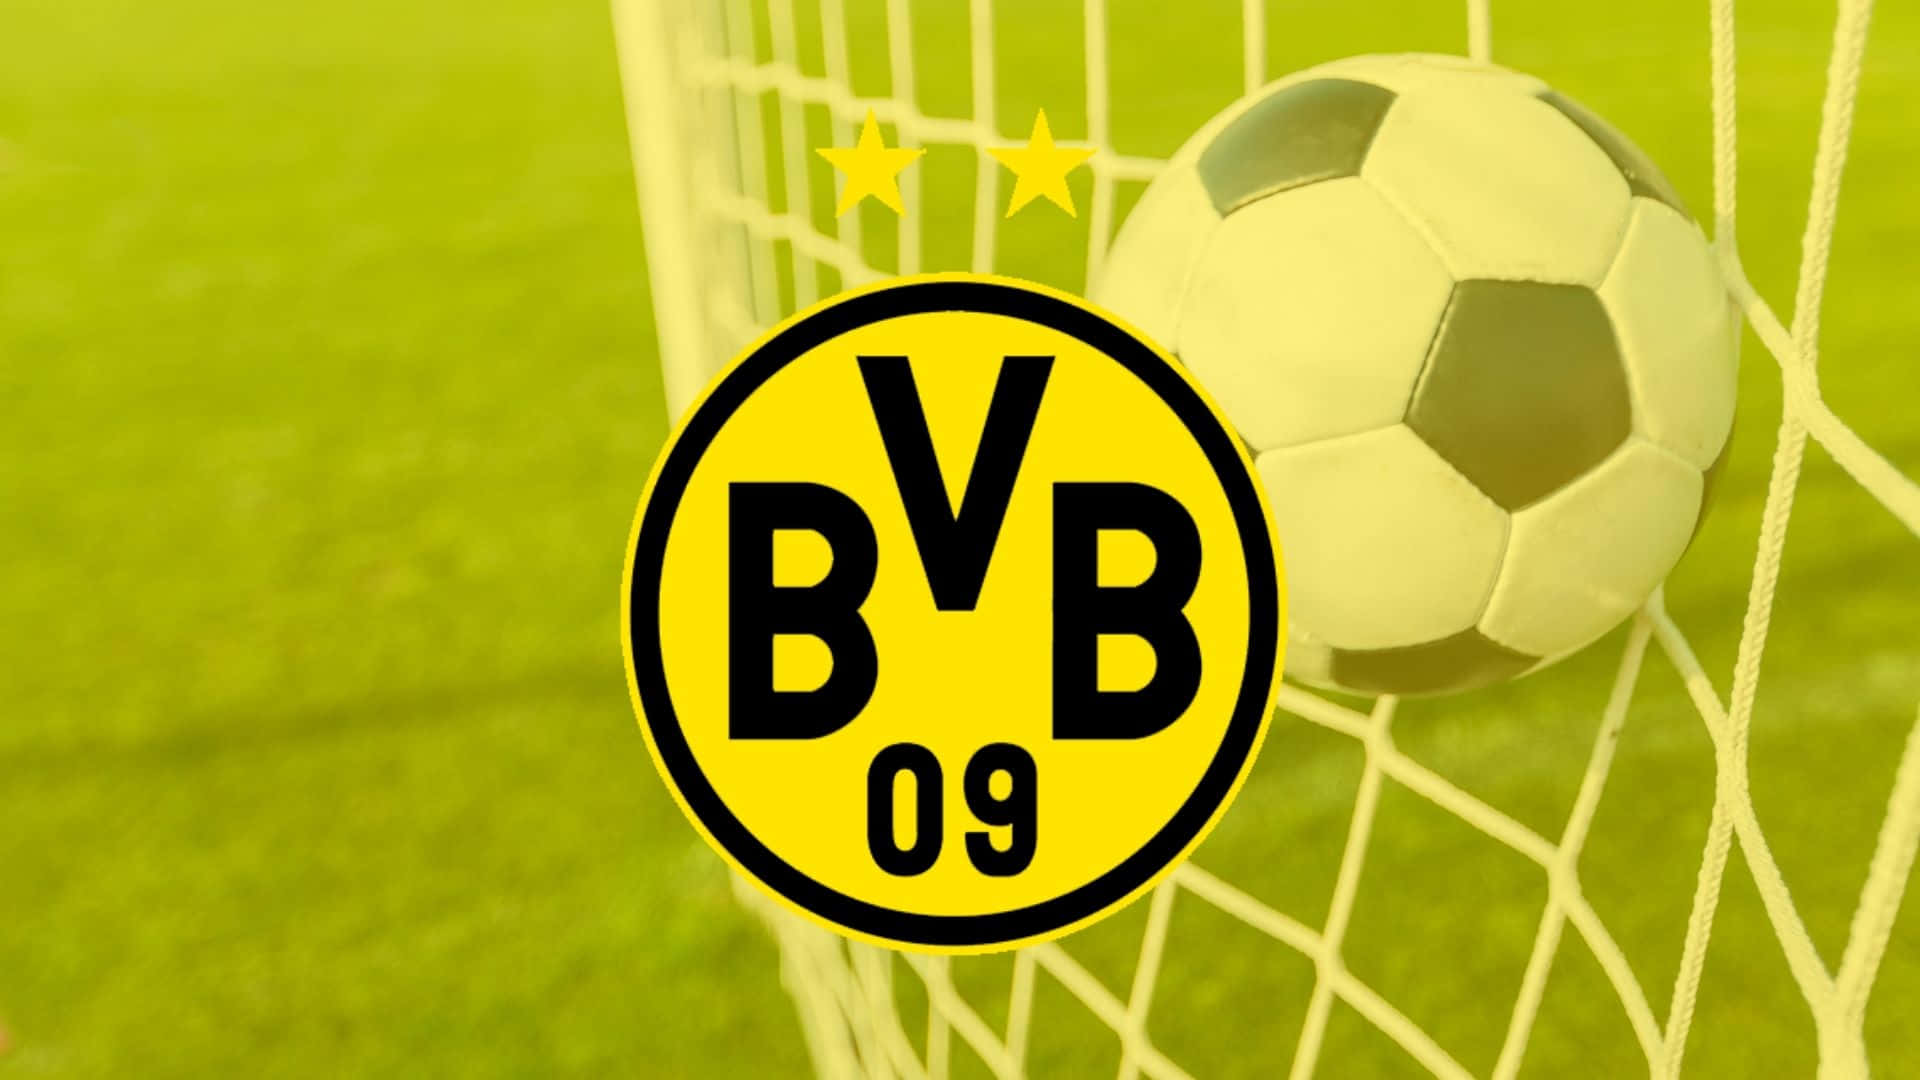 The iconic yellow and black of Dortmund Football Club. Wallpaper